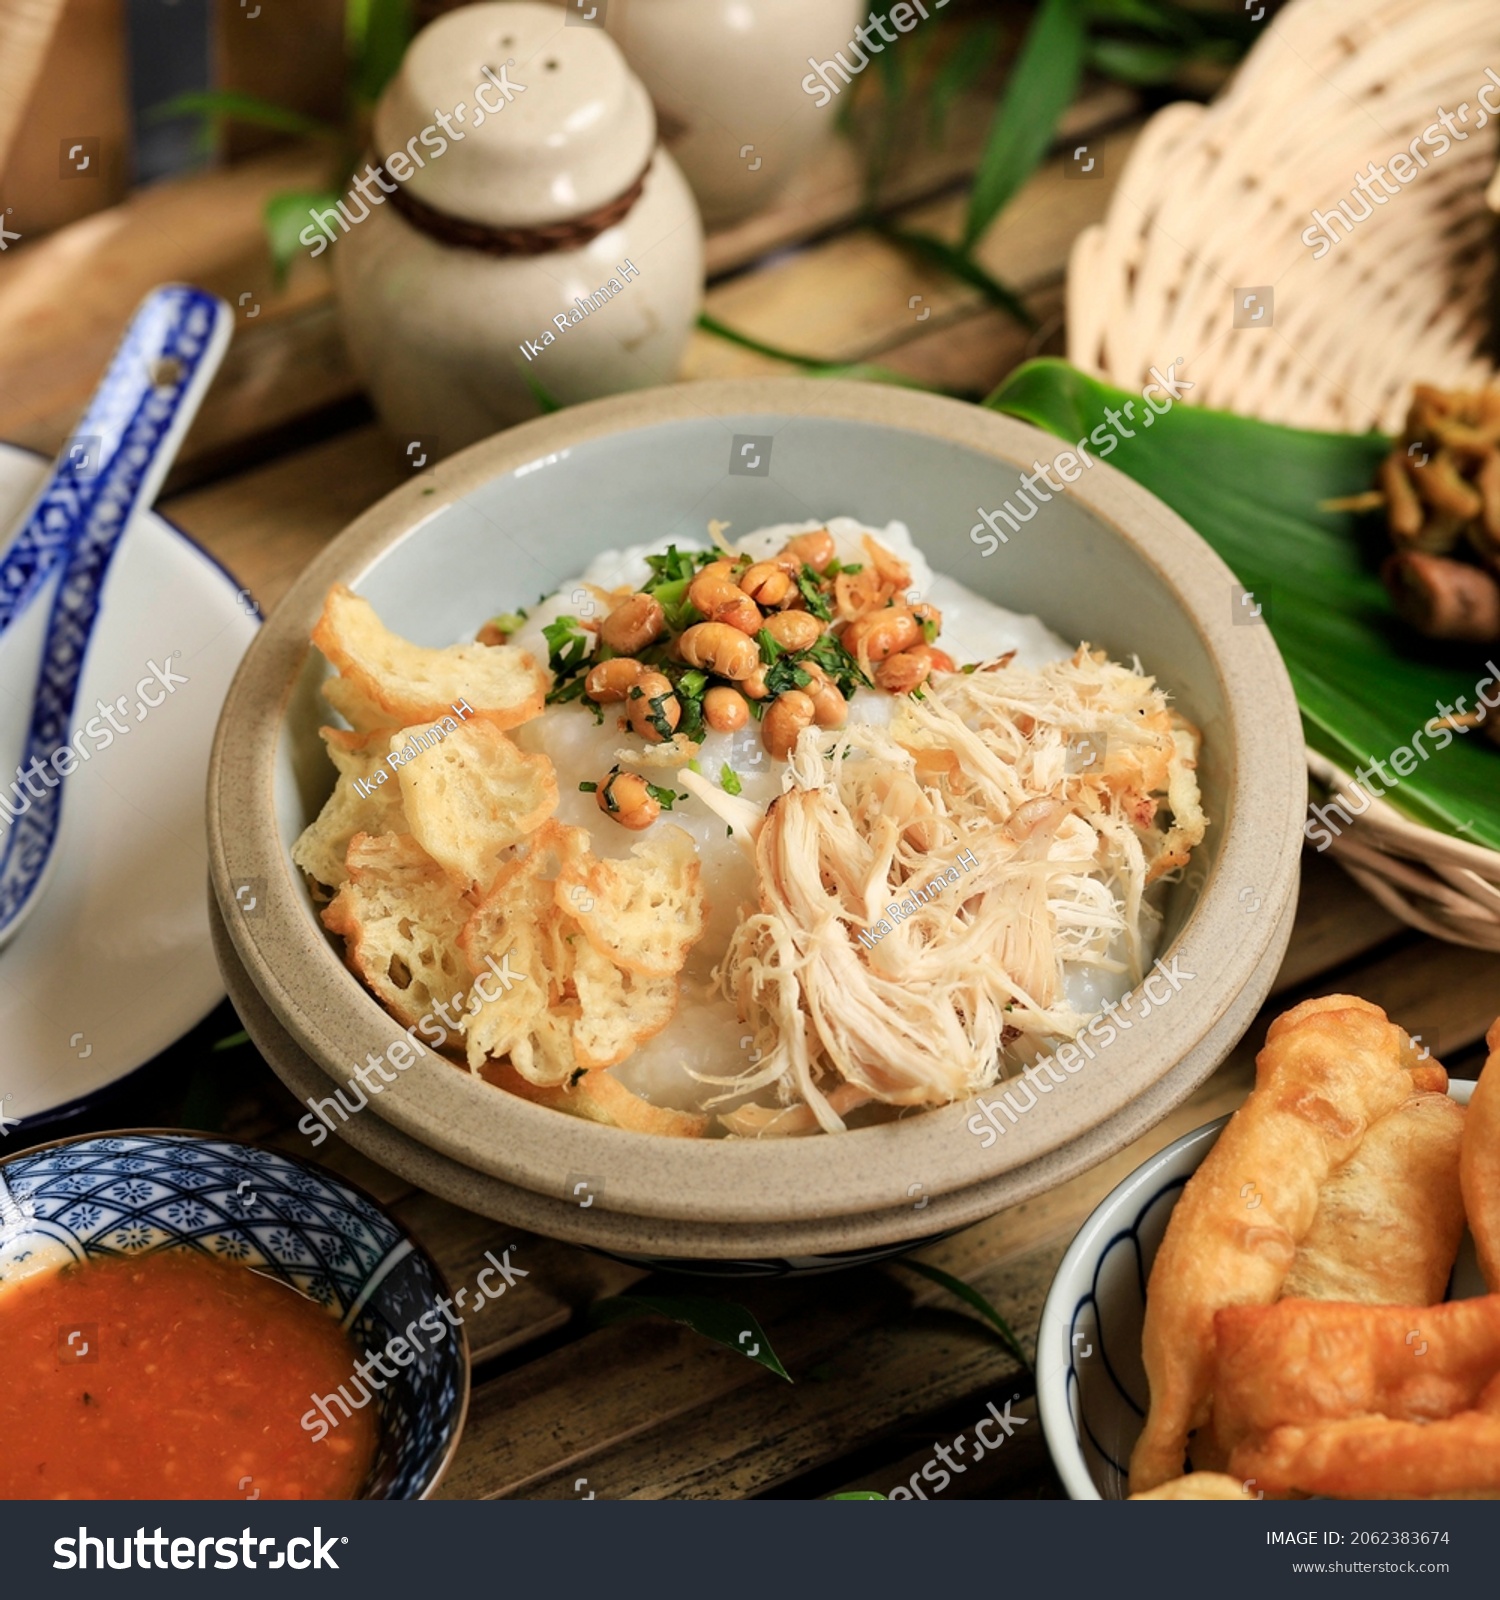 Bubur Ayam or Indonesian Rice  Porridge with Shredded Chicken. Served with Kerukpuk (Cracker), Soy Sauce, Fried Soy Bean, and Sambal #2062383674